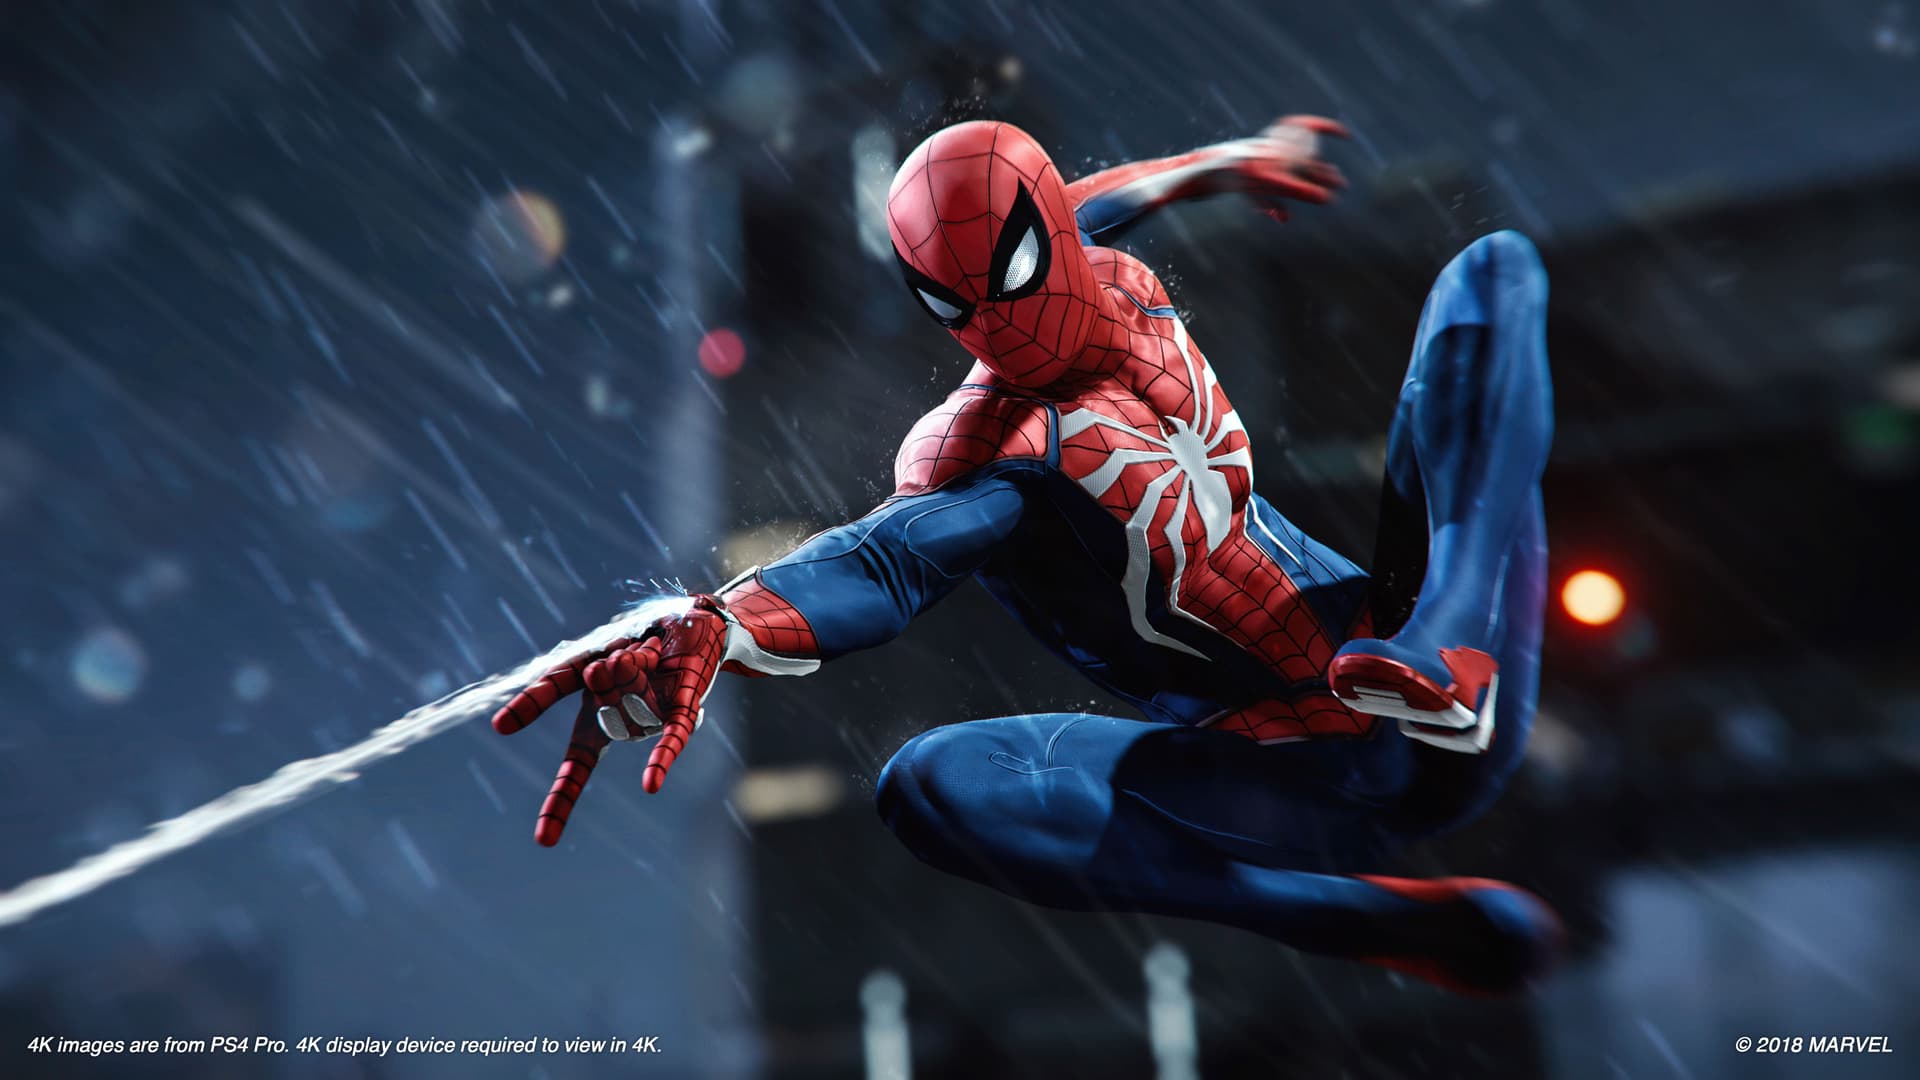 Image for PlayStation E3 2018 Showcase Reveals Gameplay Footage from Marvel’s Spider-Man